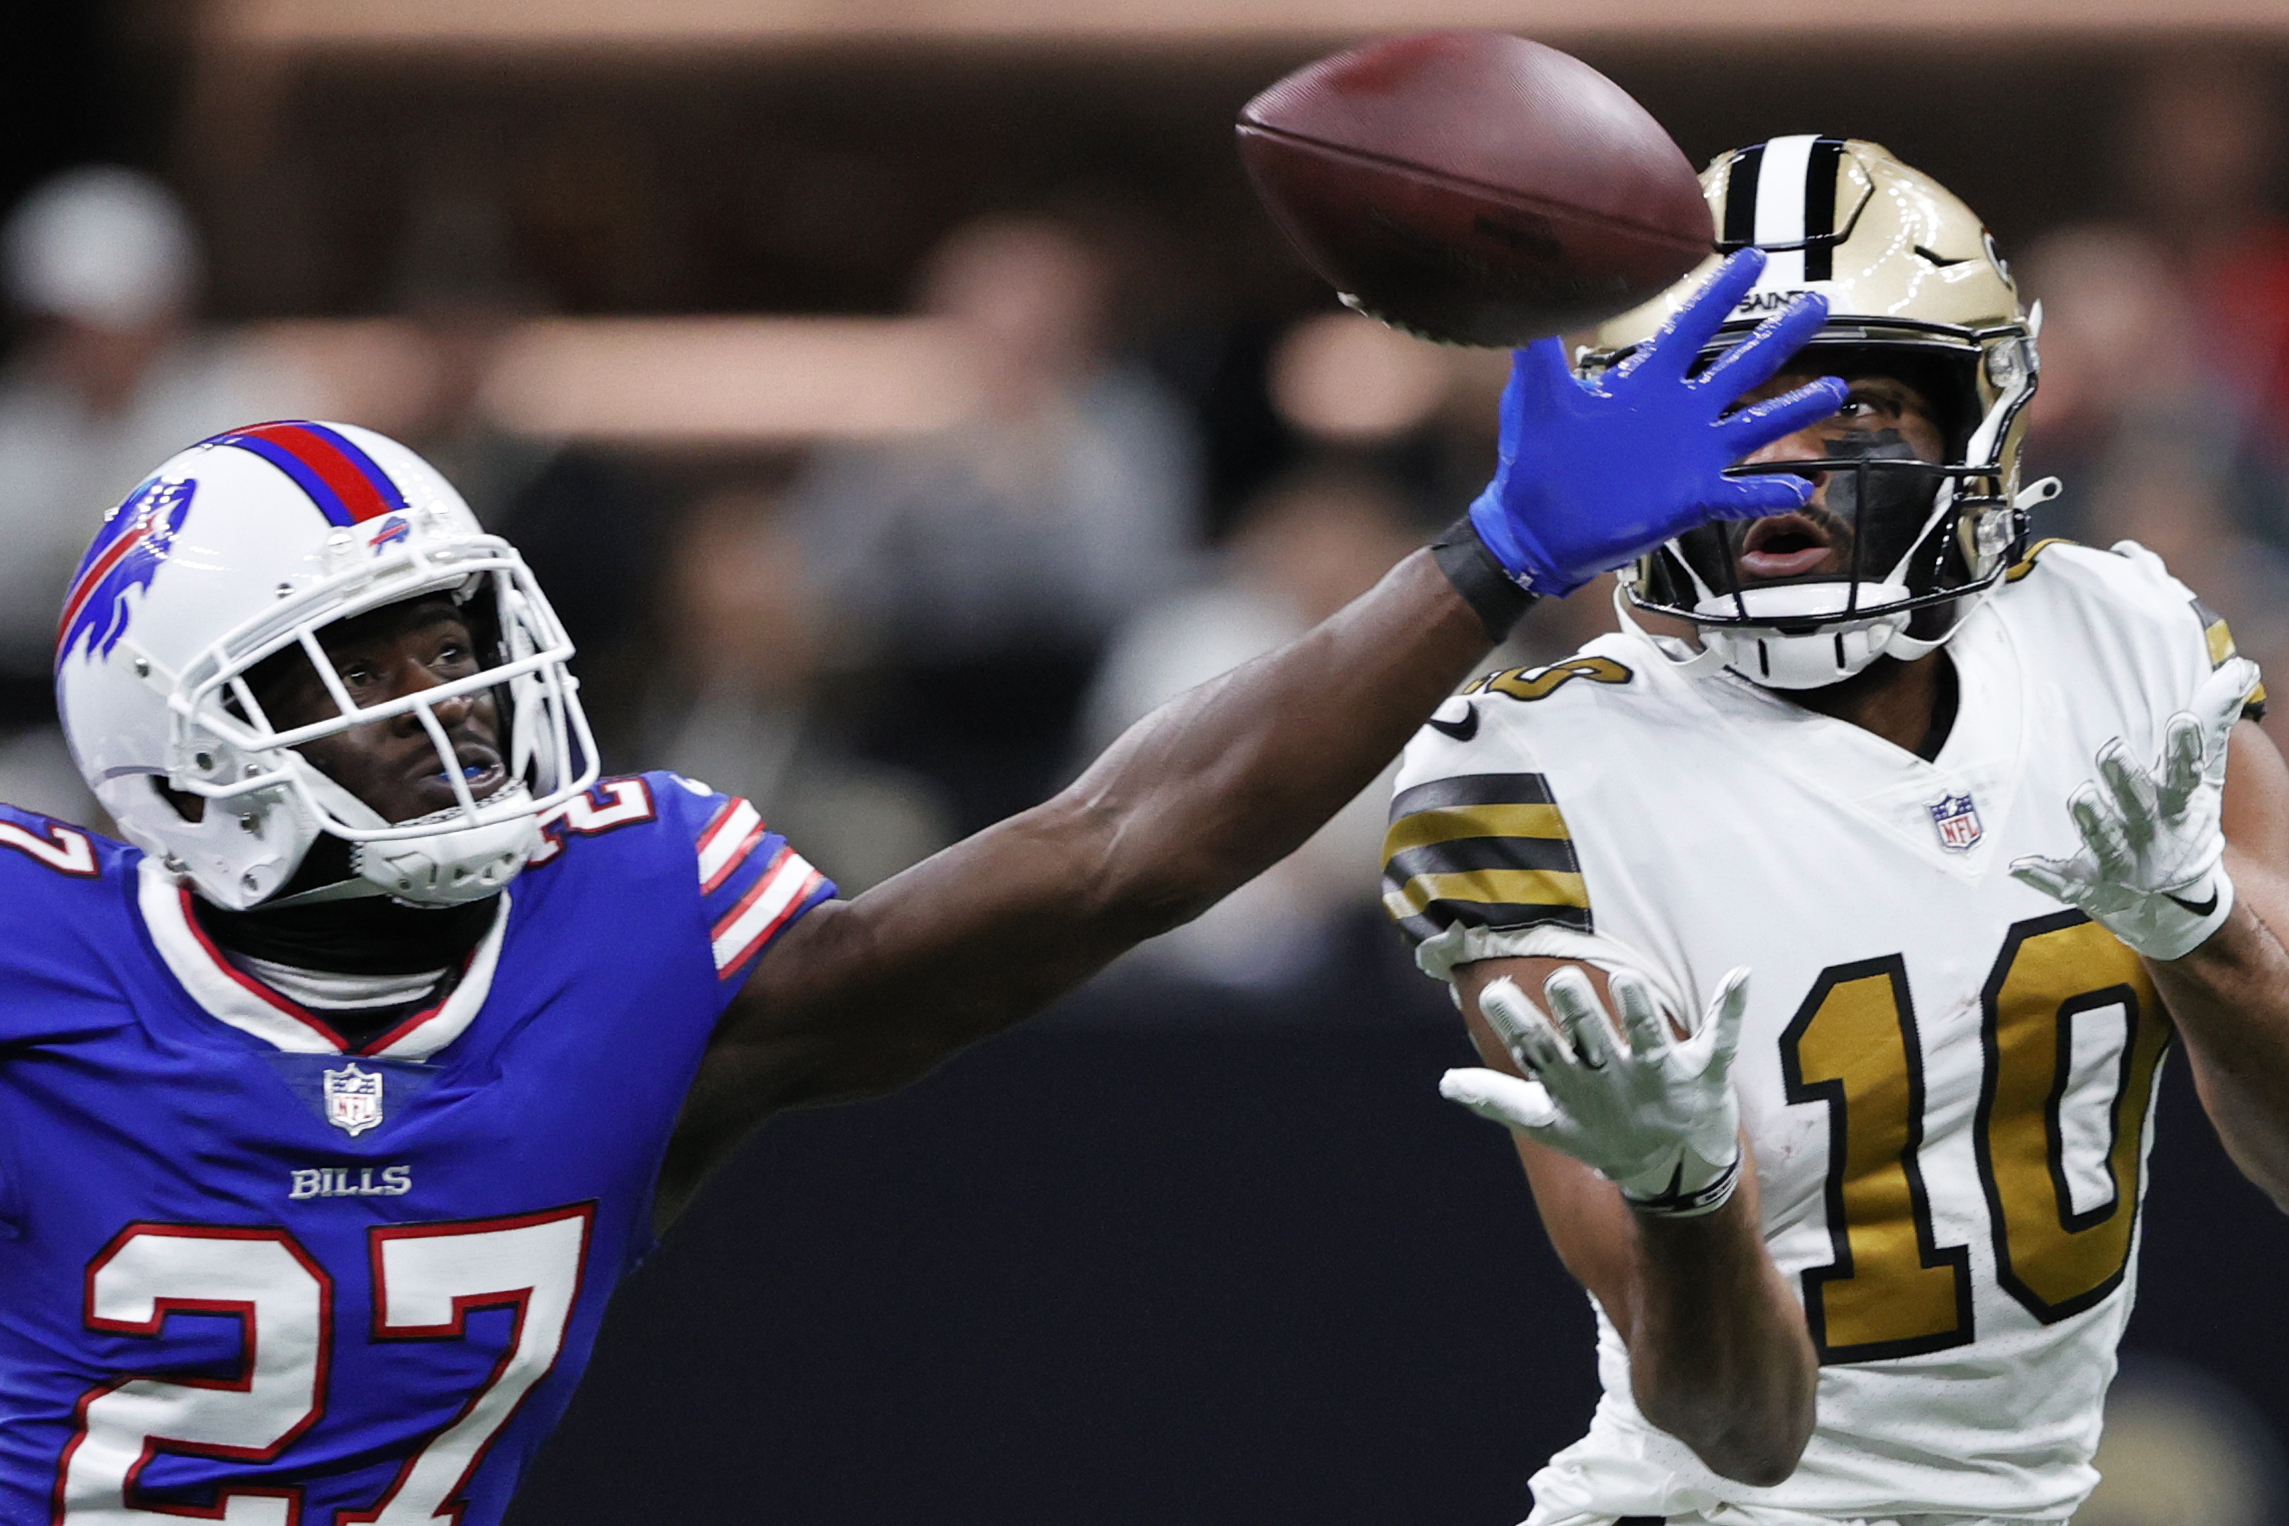 WATCH: Full highlights of Bills' 31-6 Thanksgiving win over the Saints